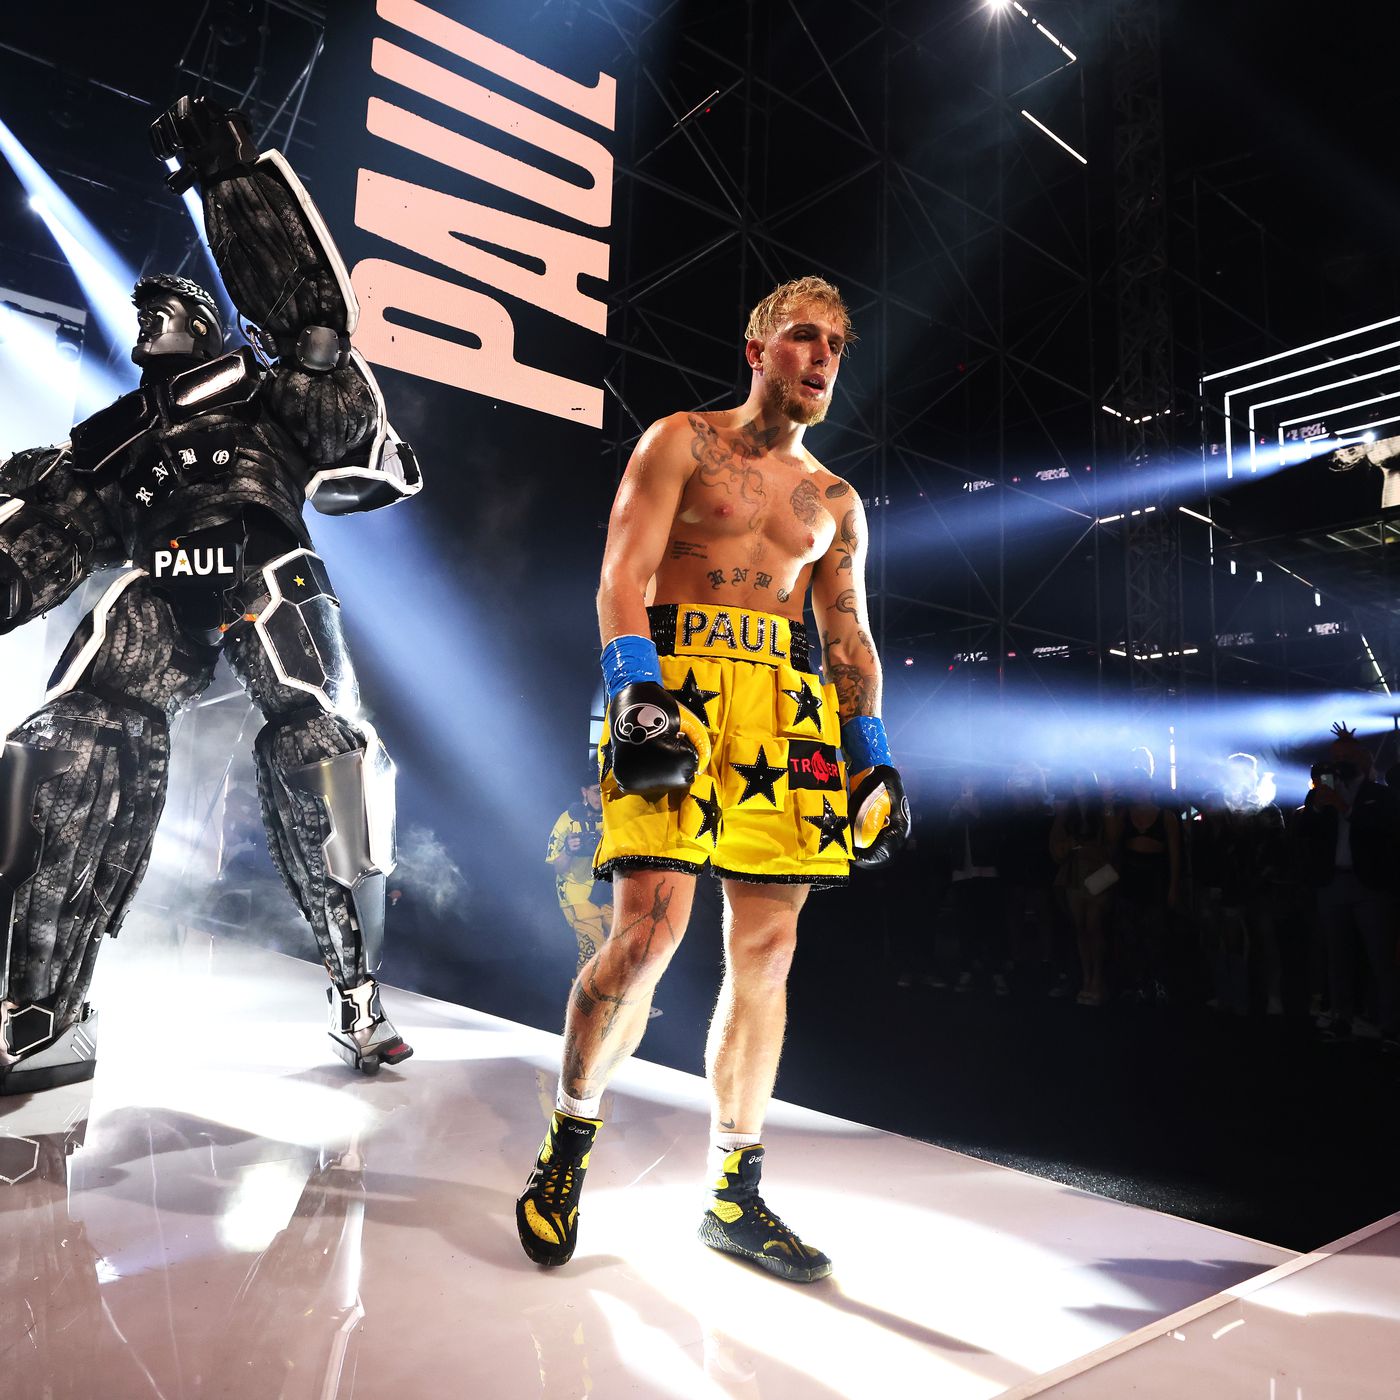 Jake Paul targeted by several MMA fighters after Ben Askren knockout, including Tyron Woodley, BJ Penn, Dillon Danis